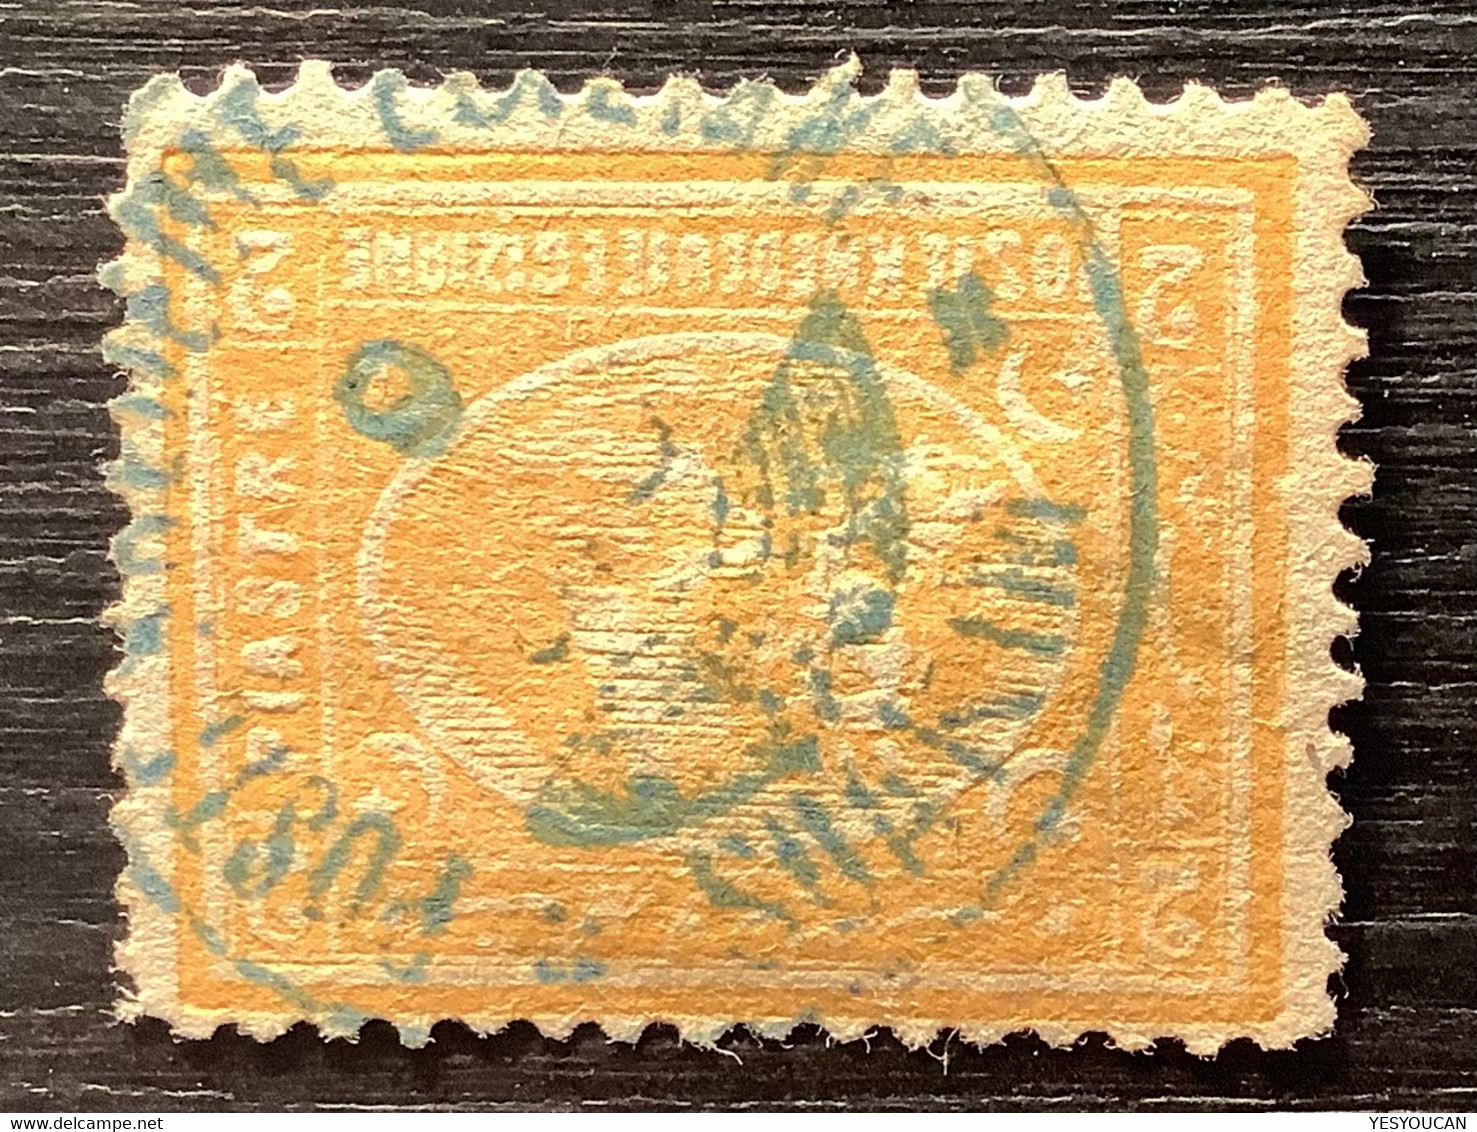 Egypt Used In Sudan: SUAKIM RRR ! (Suakin Soudan) On 1872 2 Pi ONLY ONE COVER KNOWN WITH THIS POSTMARK (Egypte - 1866-1914 Ägypten Khediva